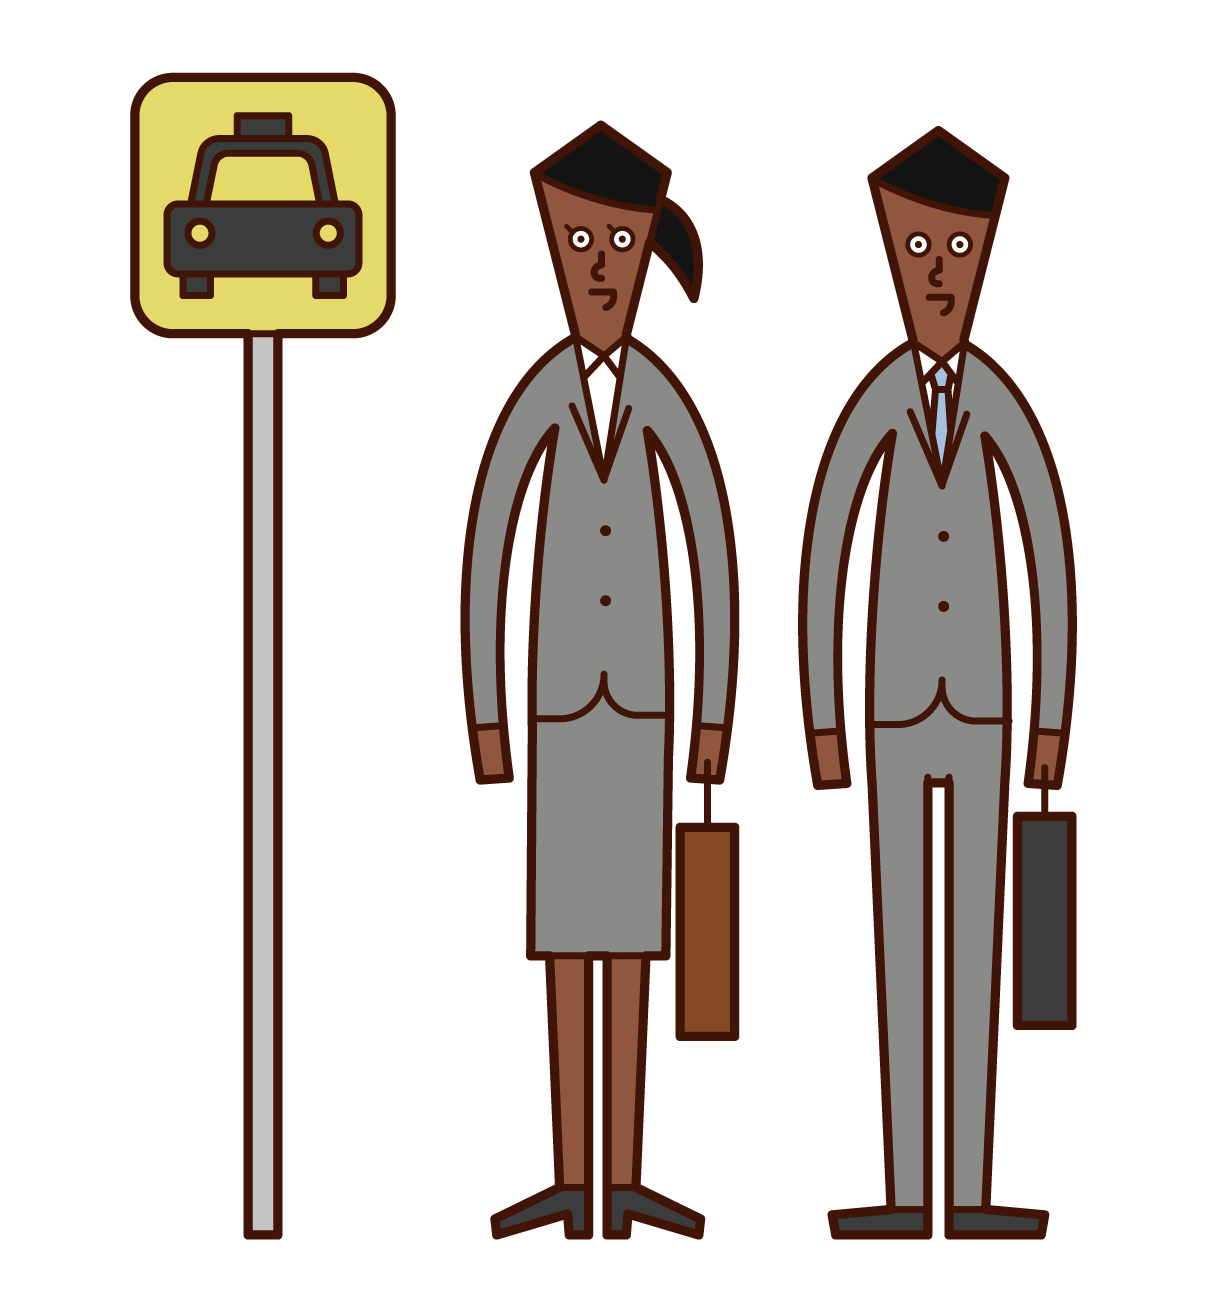 Illustration of people waiting for a taxi at a taxi station